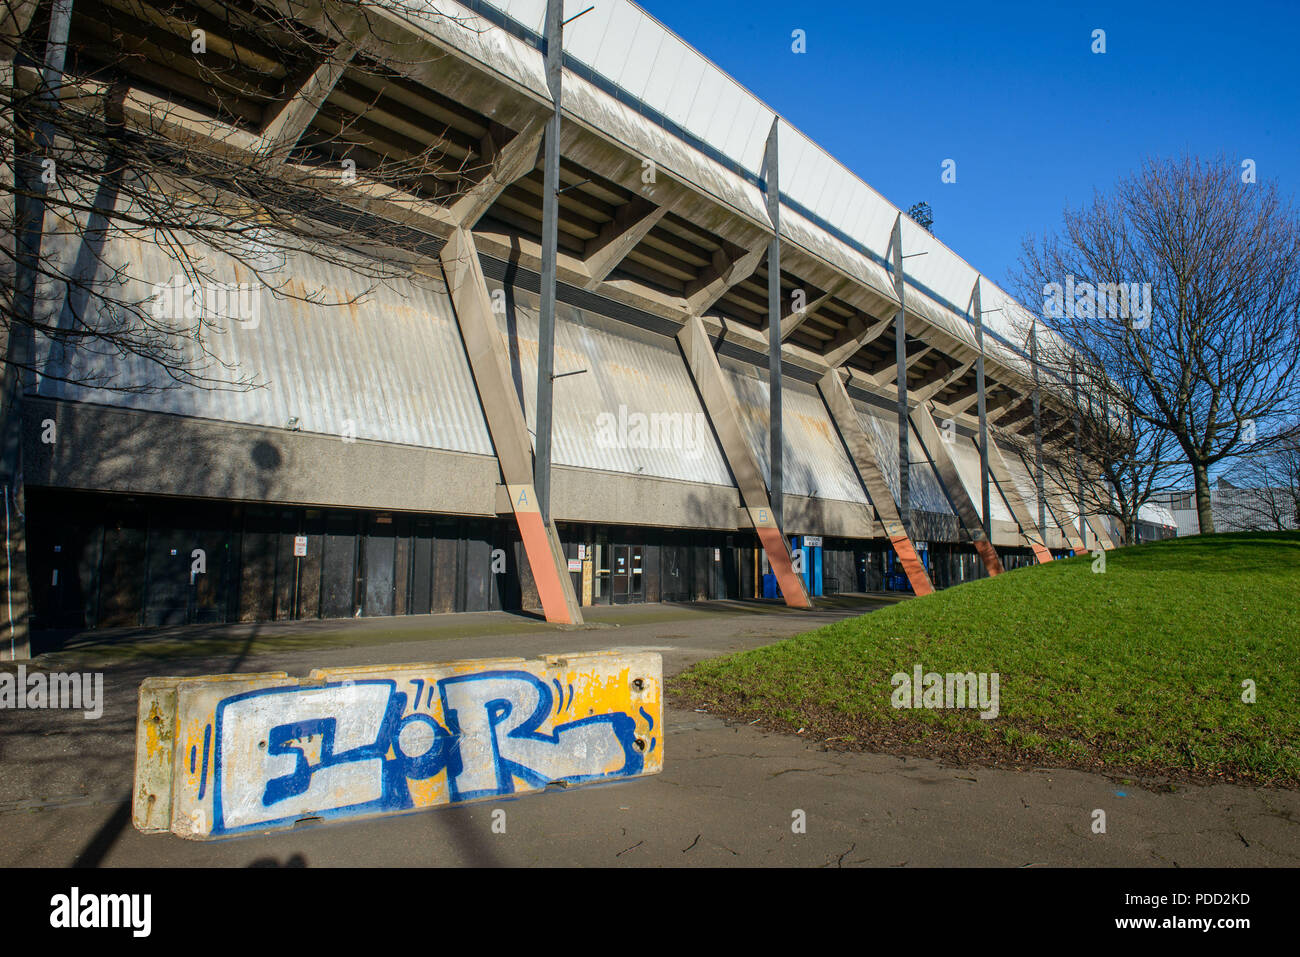 trees-outside-meadowbank-stadium-which-s